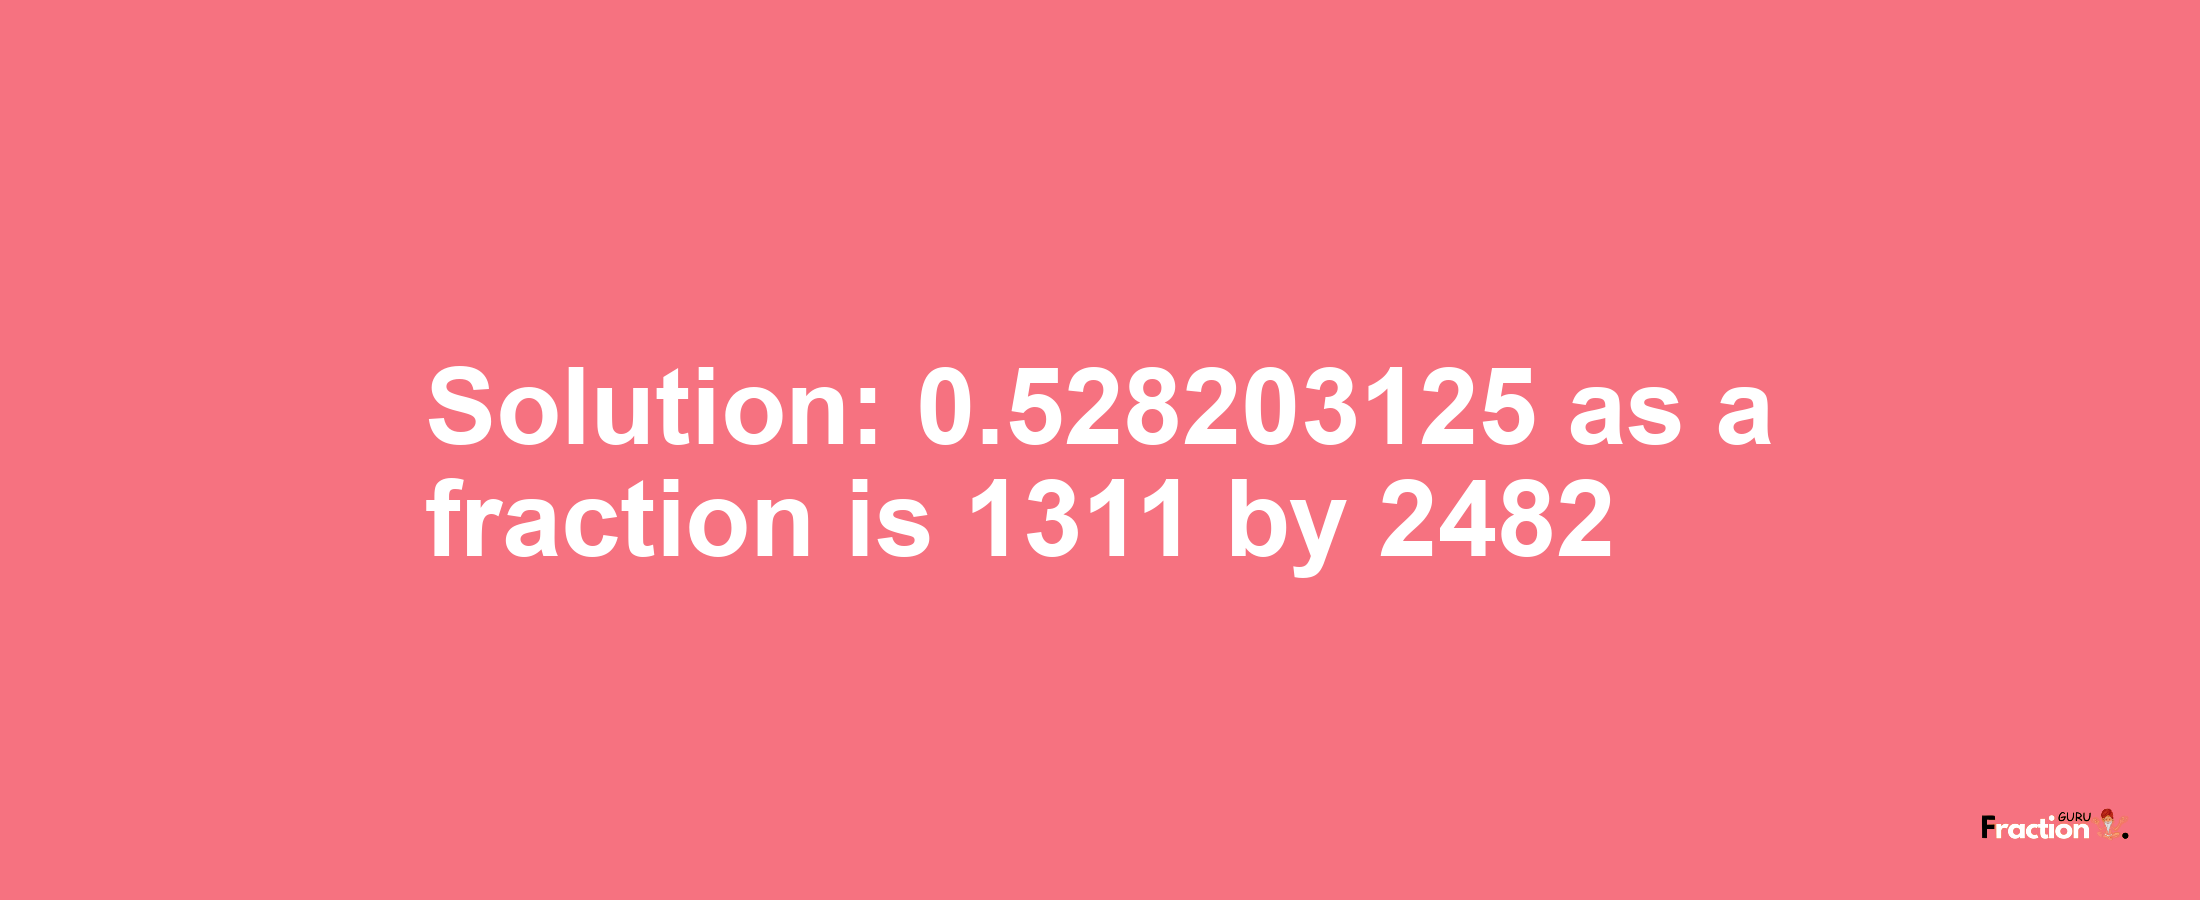 Solution:0.528203125 as a fraction is 1311/2482